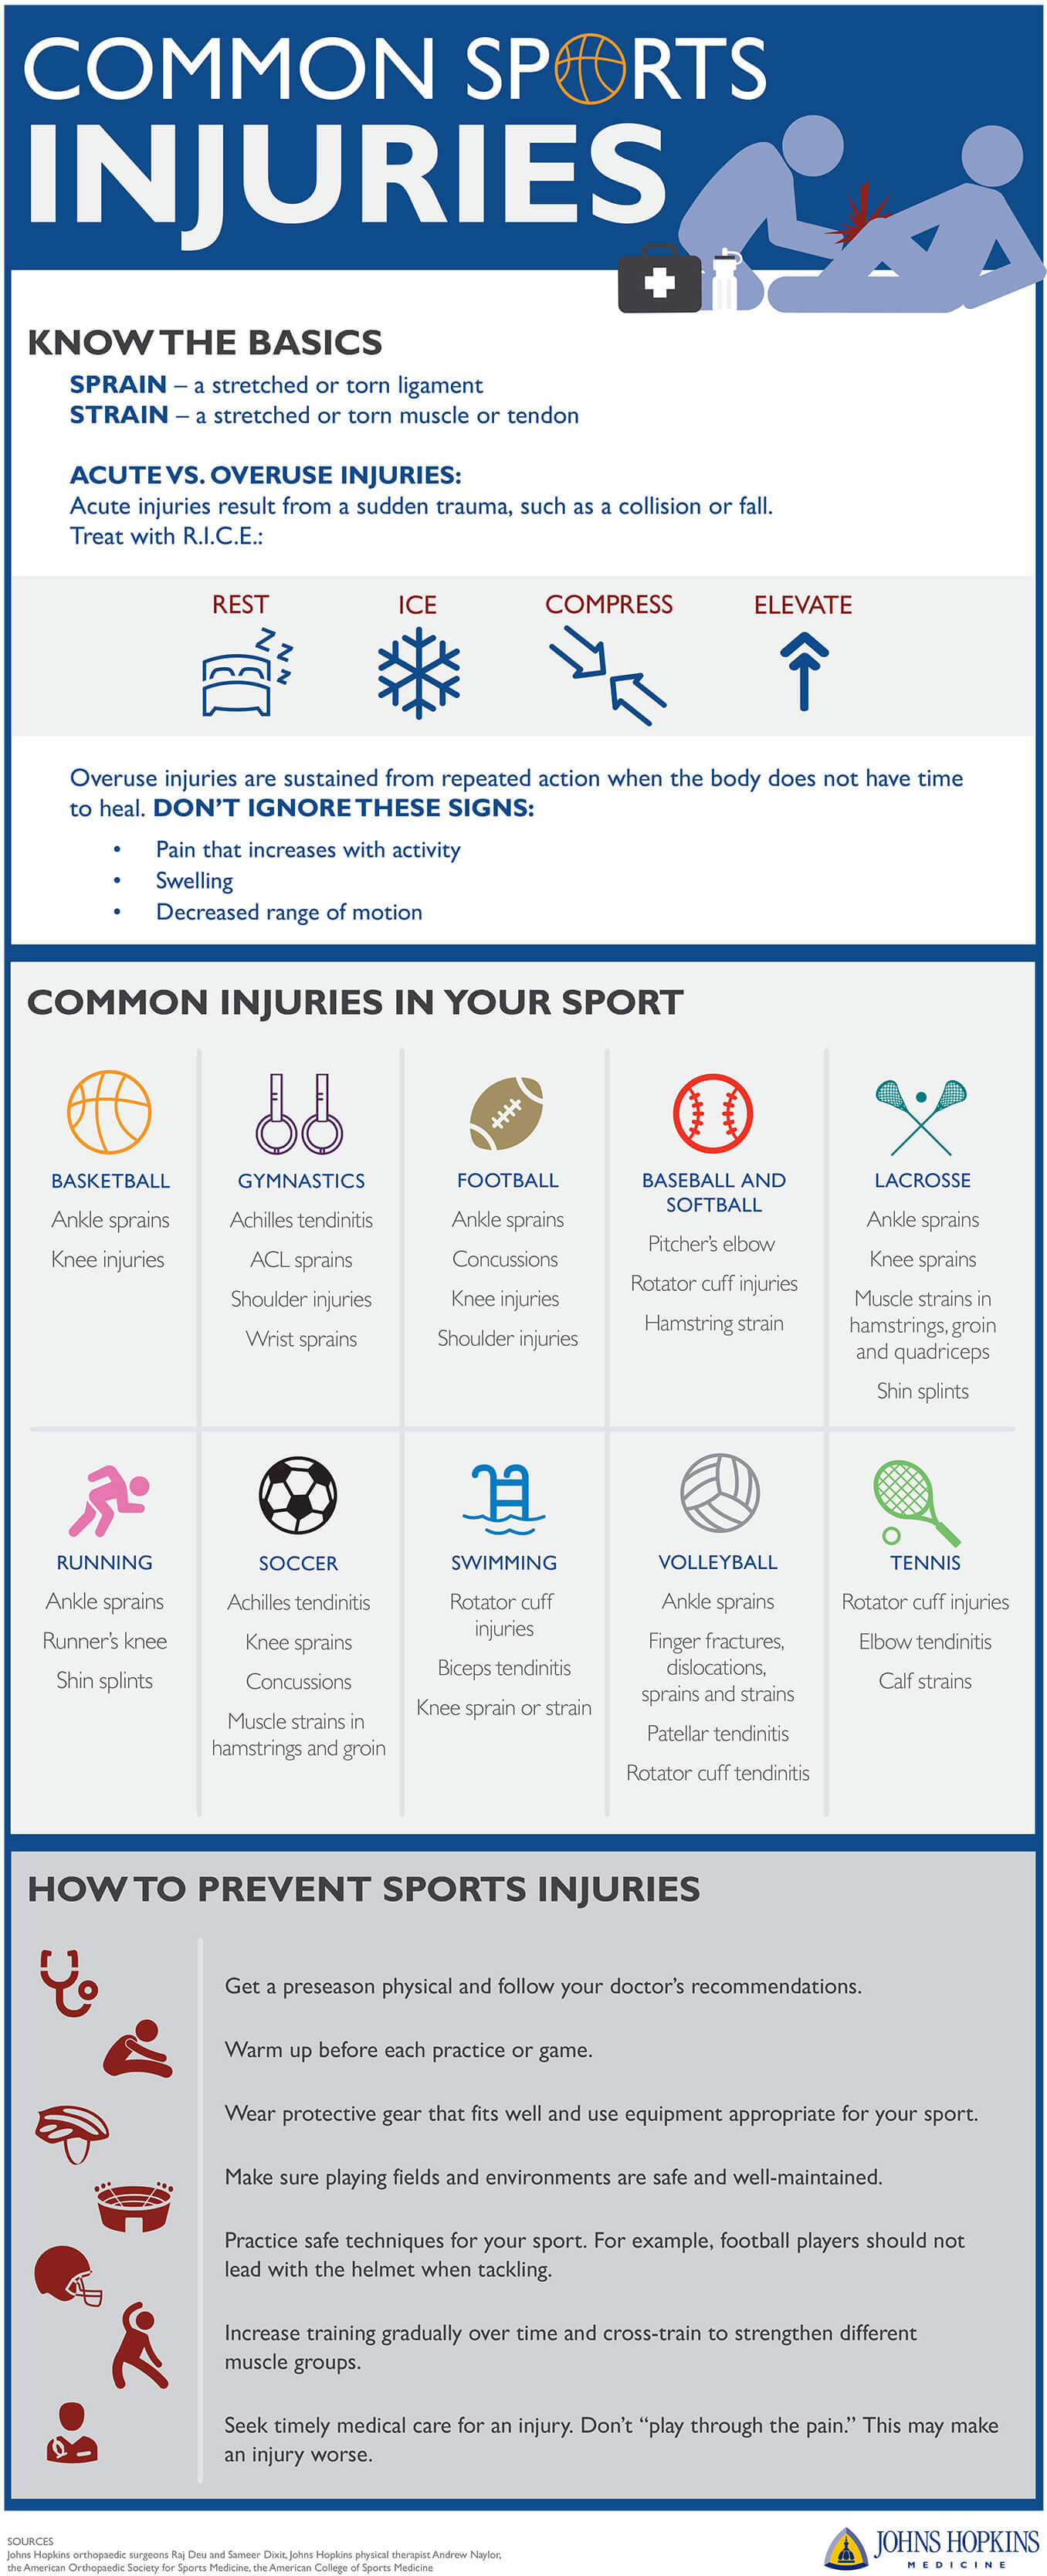 An infographic detailing how to treat and prevent common sports injuries.